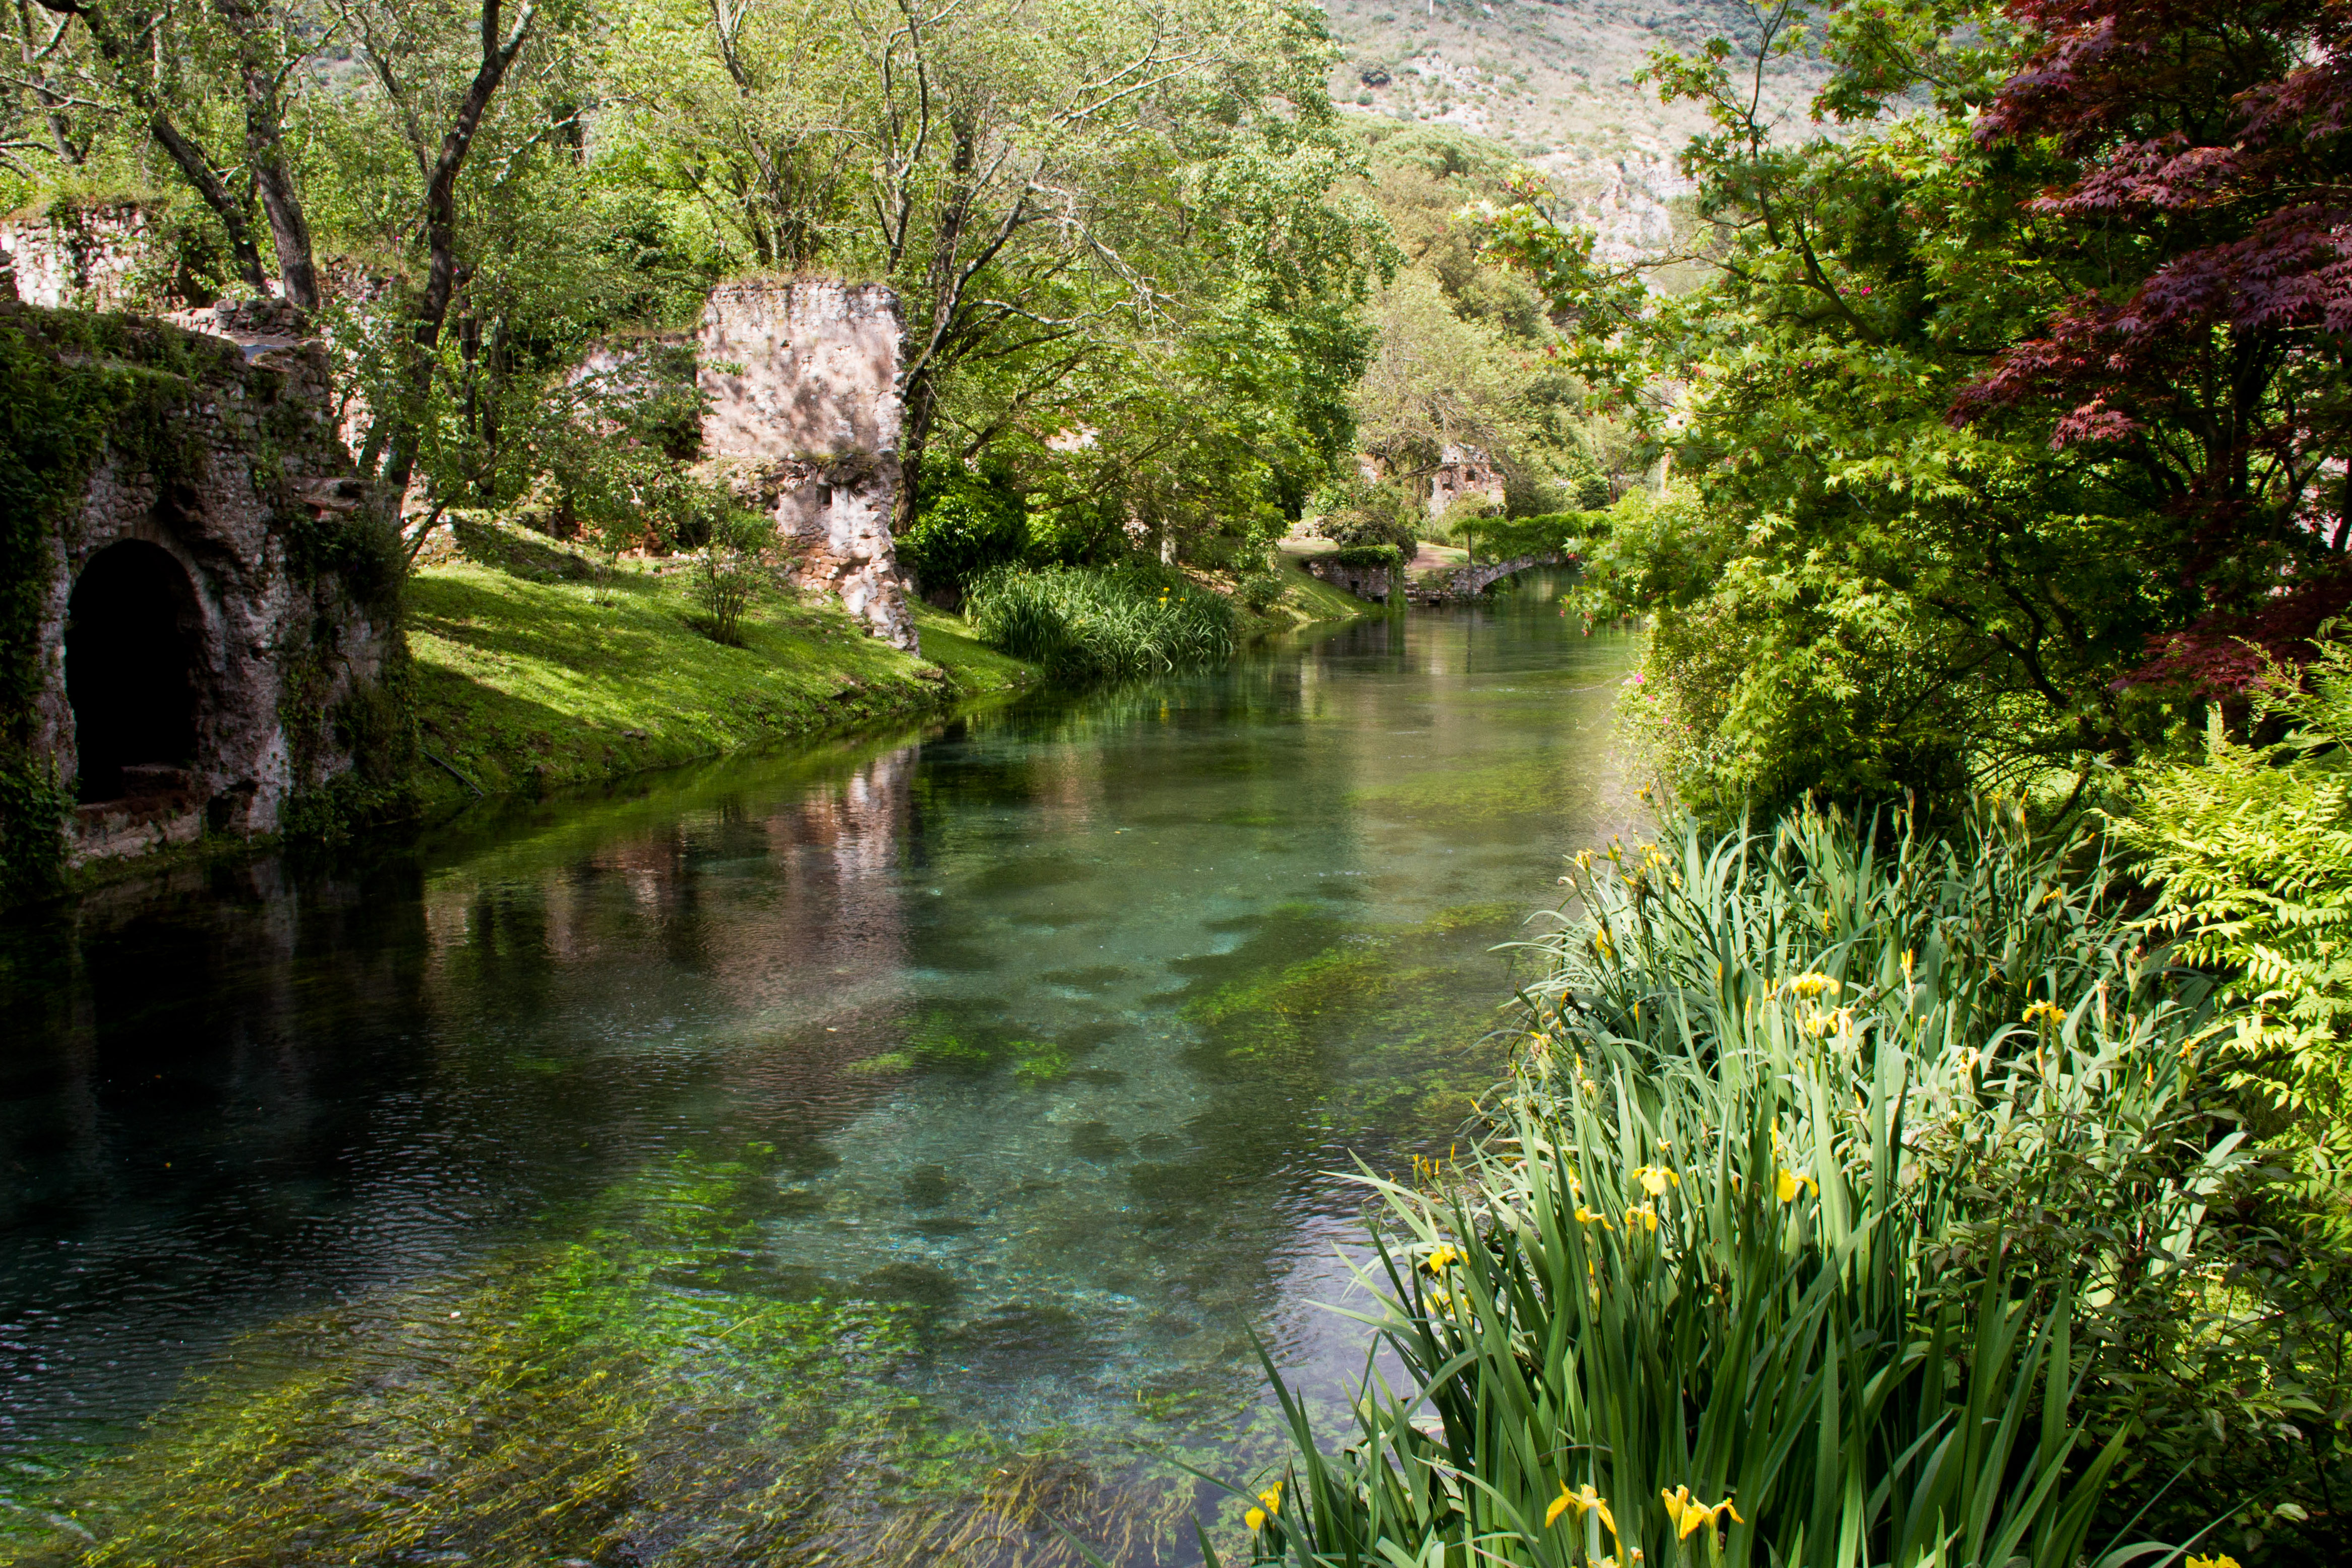 Ninfa has been described as the most romantic garden in the world.